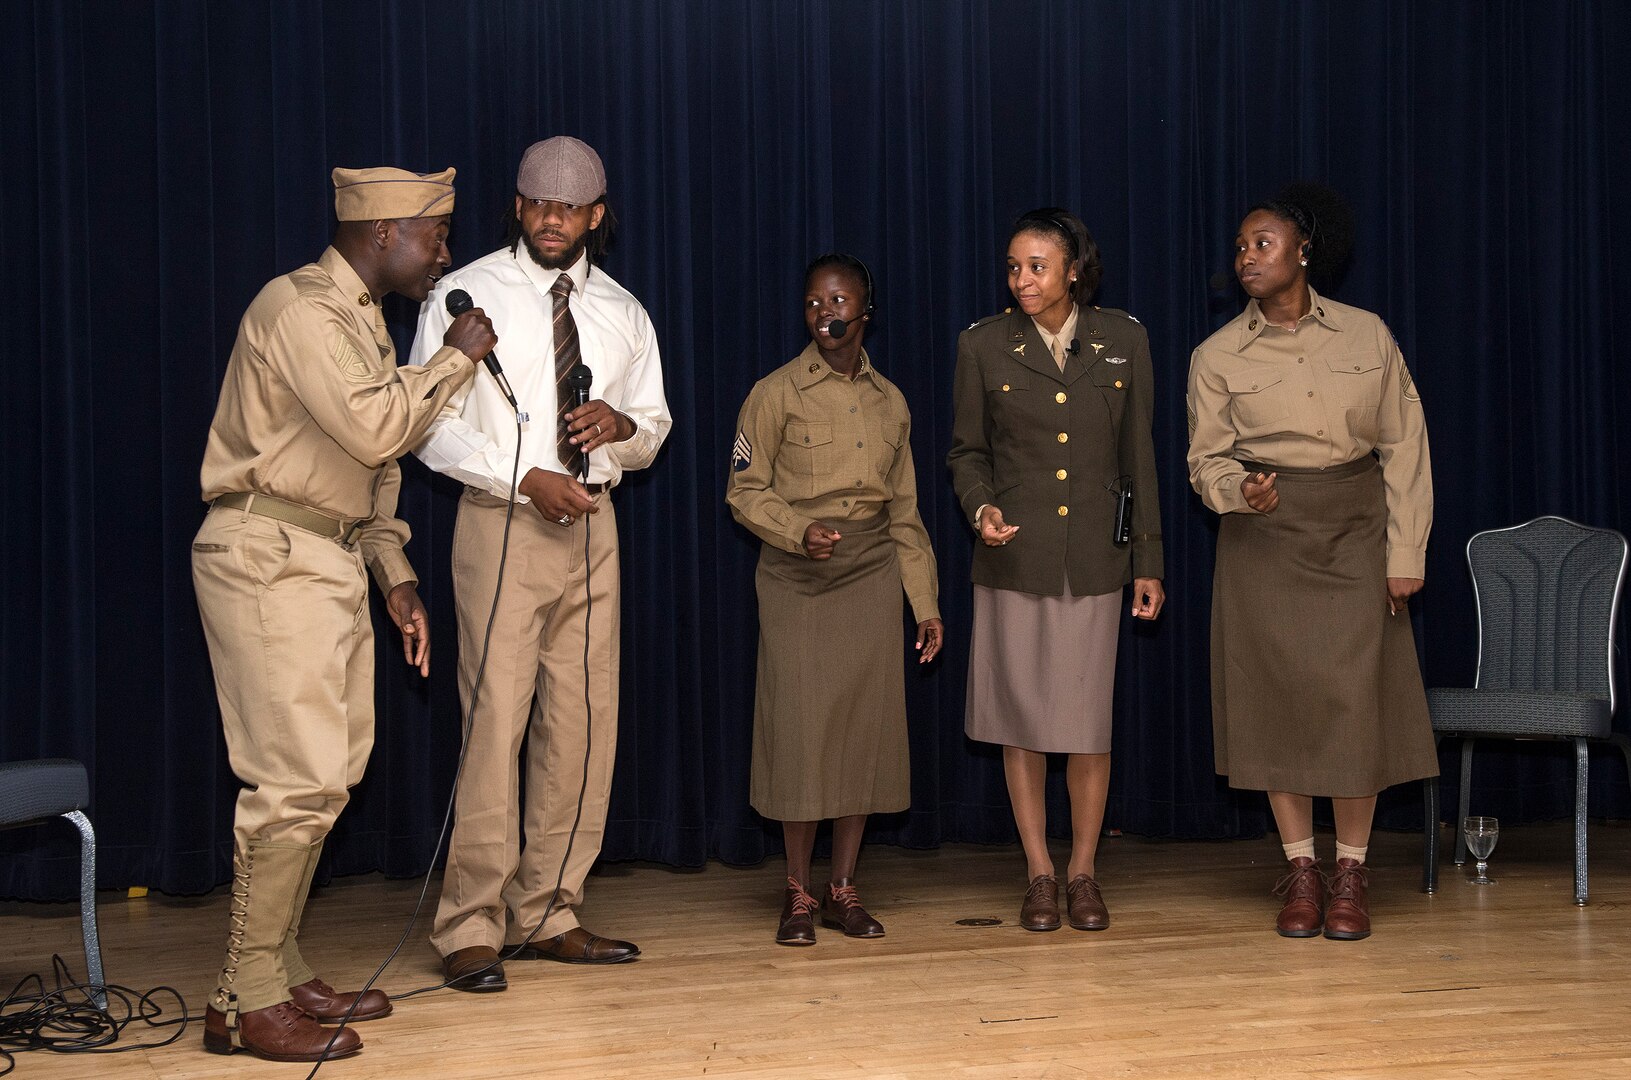 Members of the Lackland Performing Arts Group perform during the Tuskegee Airmen Tribute, June 12, 2015, at Joint Base San Antonio-Randolph’s Parr Club.  Members of the JBSA-Randolph community celebrated the legacy of the first all-black unit by paying tribute to seven of the documented original Tuskegee Airmen members.  The Tuskegee Airmen distinguished themselves during World War II with more than 15,500 sorties and 1,500 missions in Europe and North Africa and earned numerous combat awards.  The event featured musical entertainment, comments by 12th Flying Training Wing leaders, an introduction of four Tuskegee Airmen present and a presentation of gifts to them. Members of the audience had an opportunity to mingle with the Tuskegee Airmen and listen to their stories. (U.S. Air Force photo by Johnny Saldivar/released)